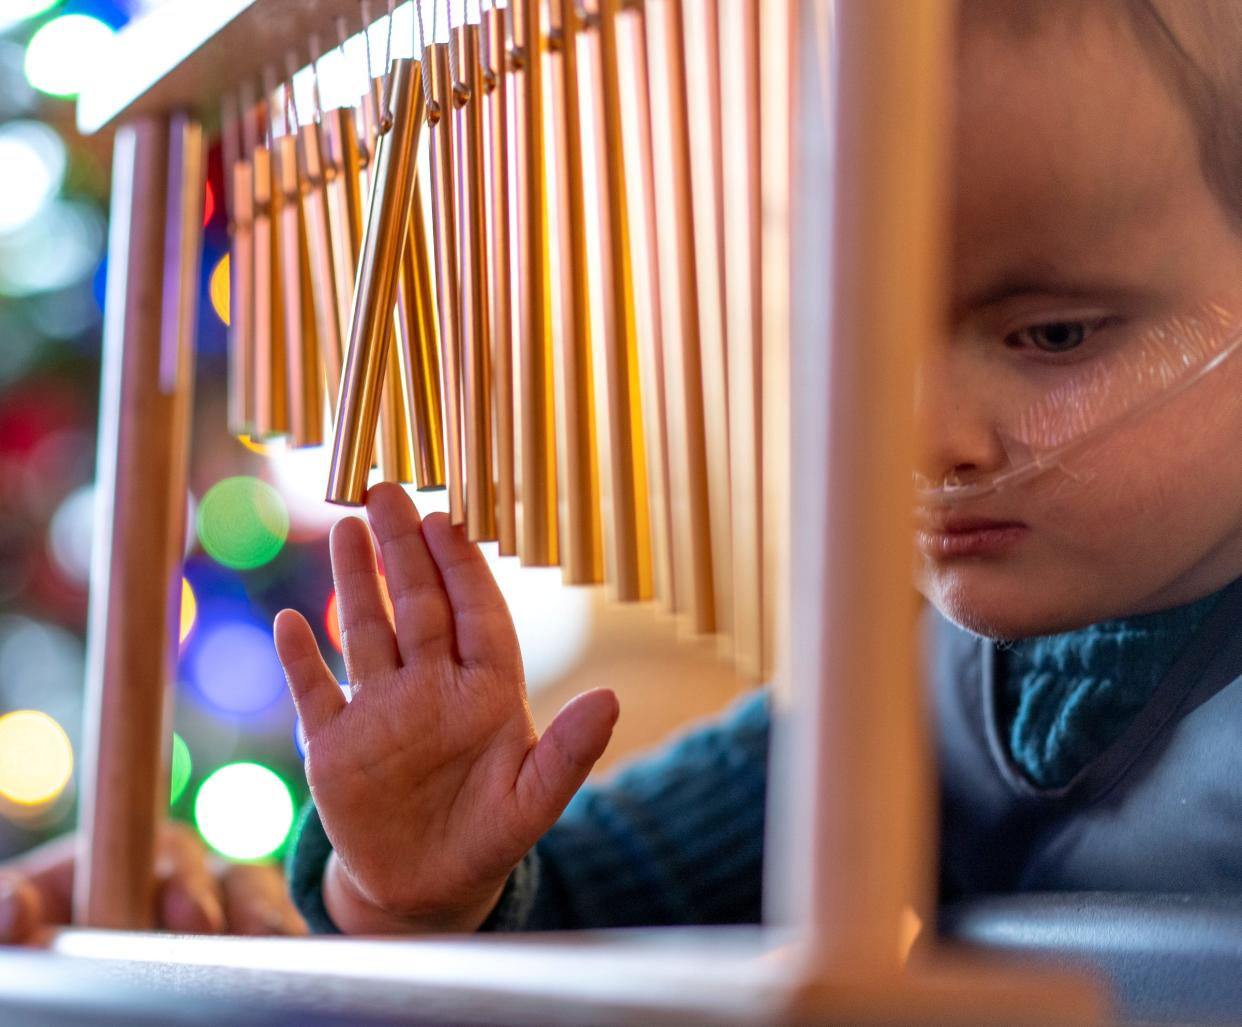 CC Calleja, 4, who was born with Trisomy 18, runs her hand on a set of chimes while in a stander to help with her leg strength, circulation and digestion in the living room of their home on Dec. 22, 2023.